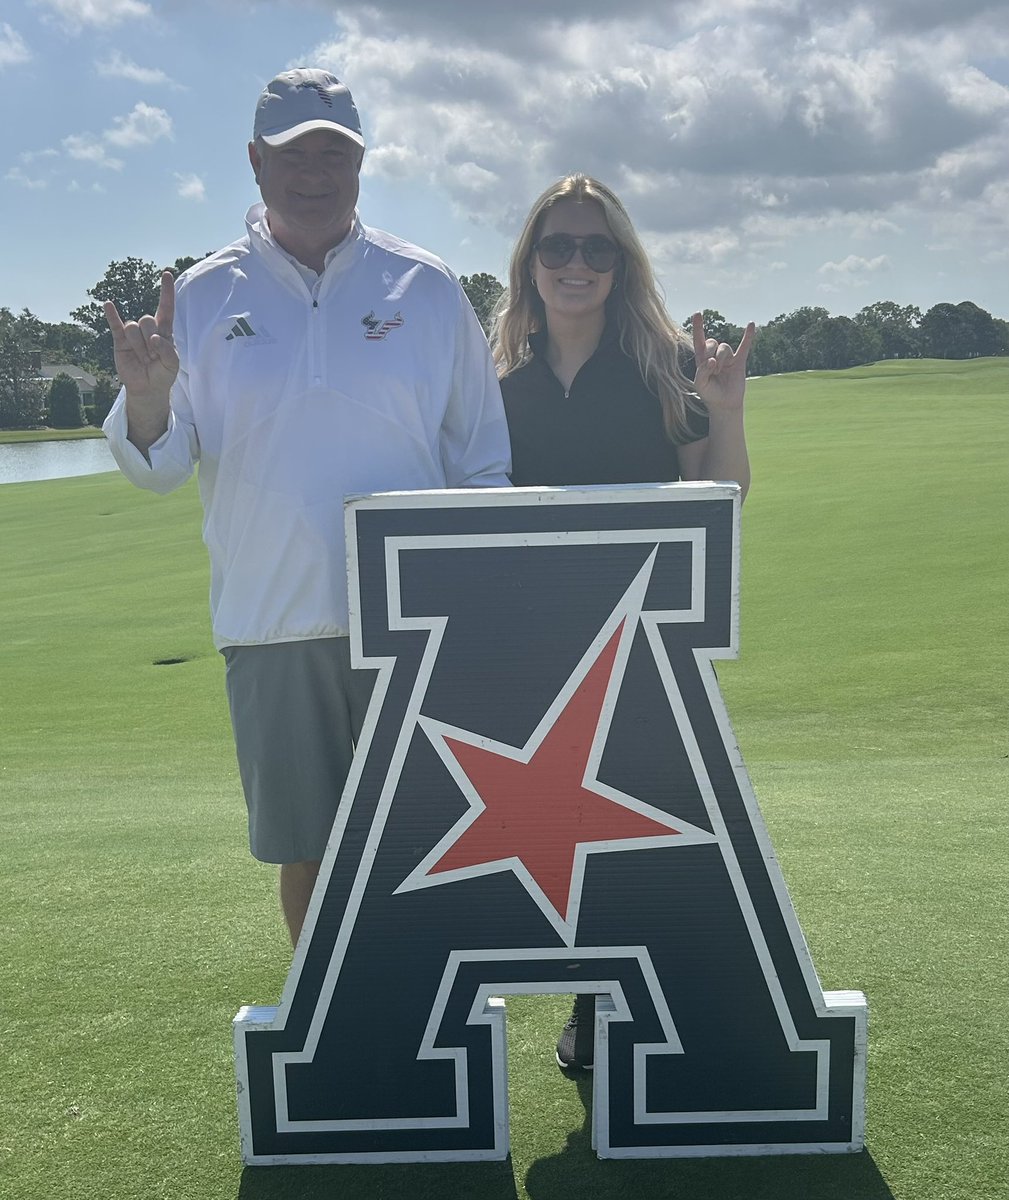 Great morning with @USFMGolf at the #AmericanGolf Championship at Pelican Golf Club…Go Bulls! 🤘⛳️